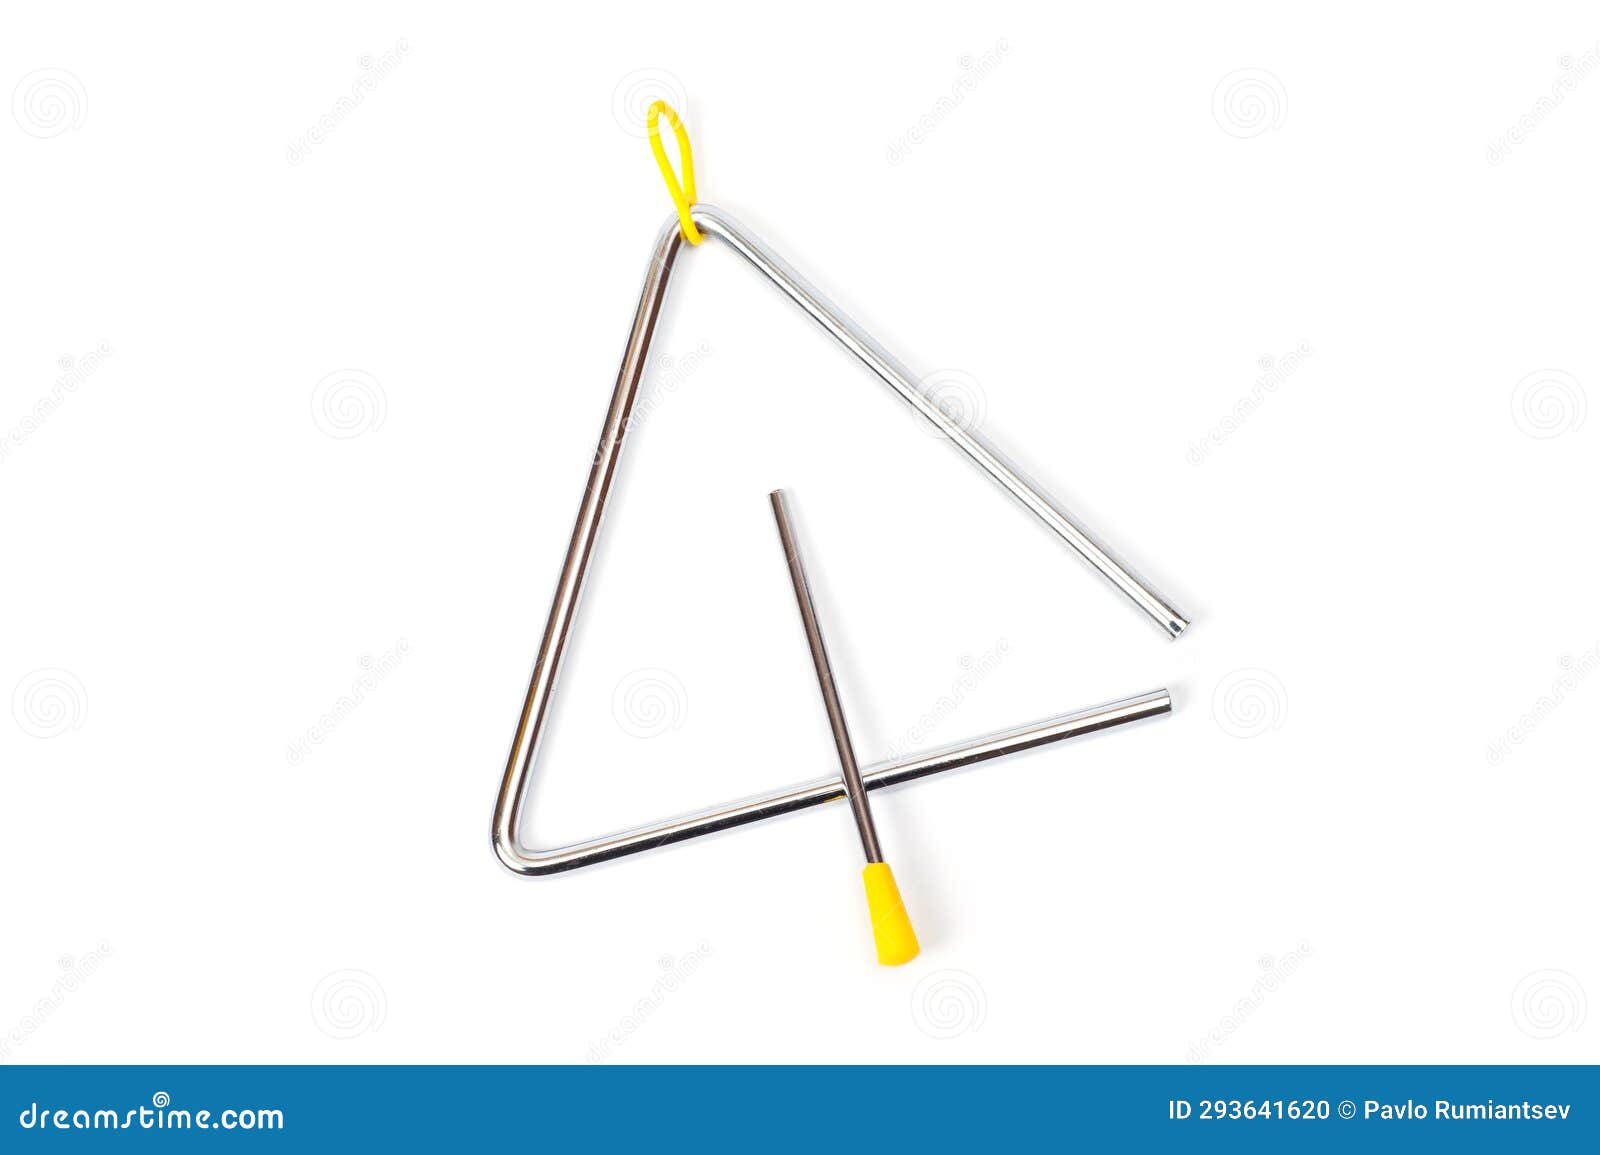 metal triangle, percussion musical instrument, easy to use for orchestras and ensembles